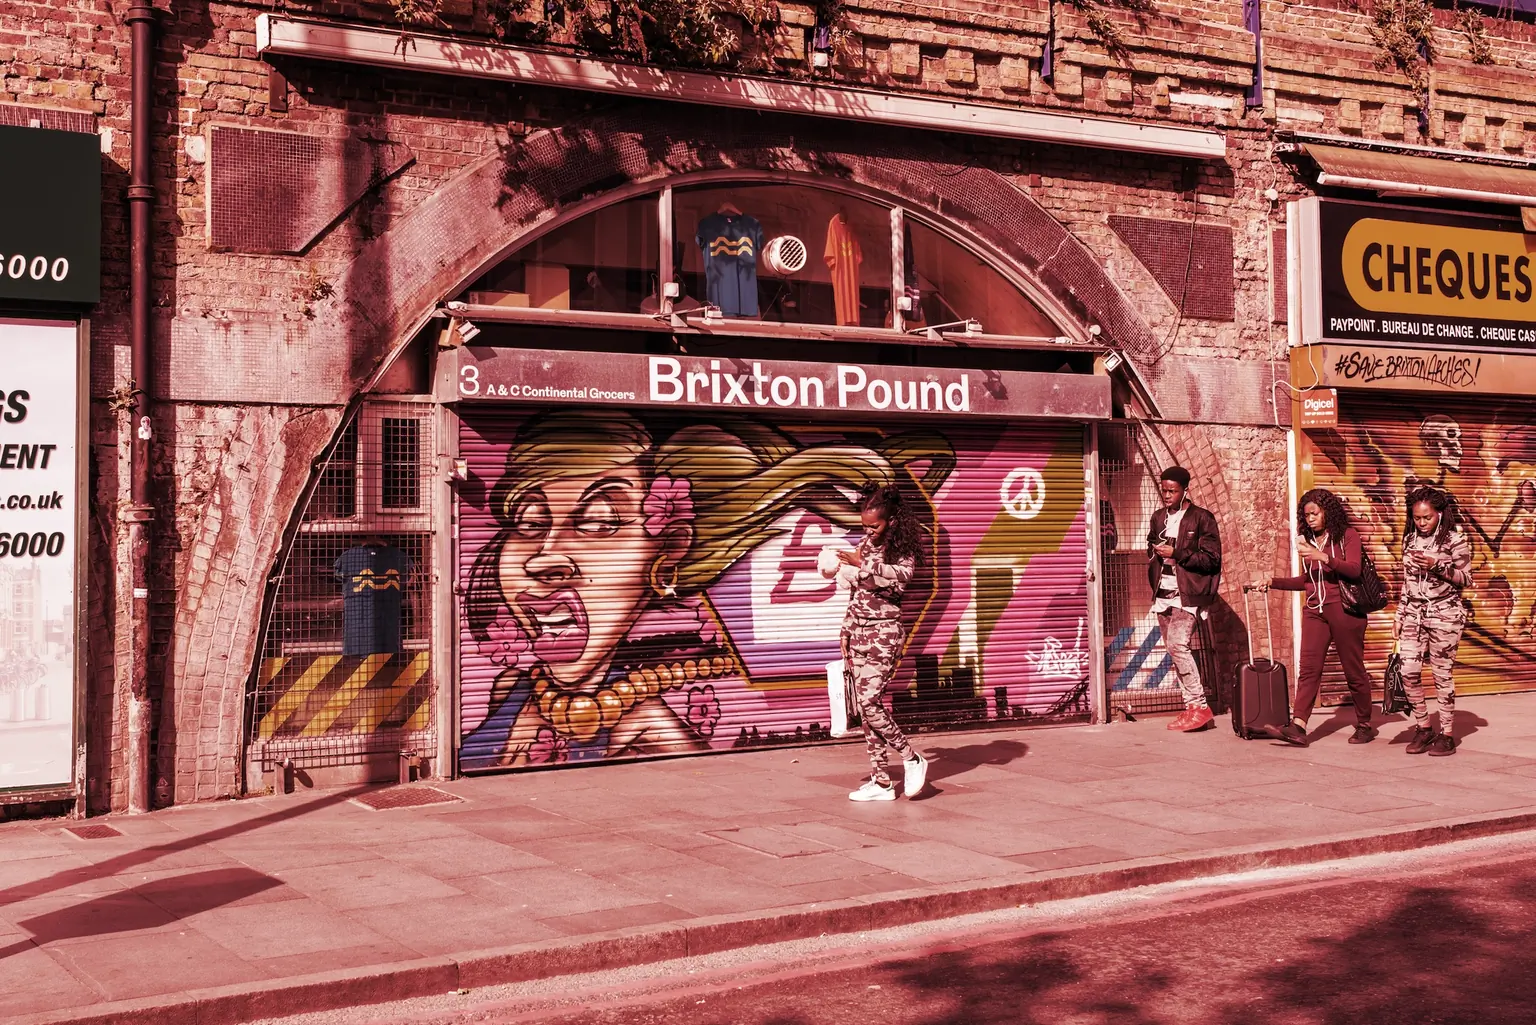 The Brixton Pound Shop. The local currency was first issued in 2009. Image: Shutterstock